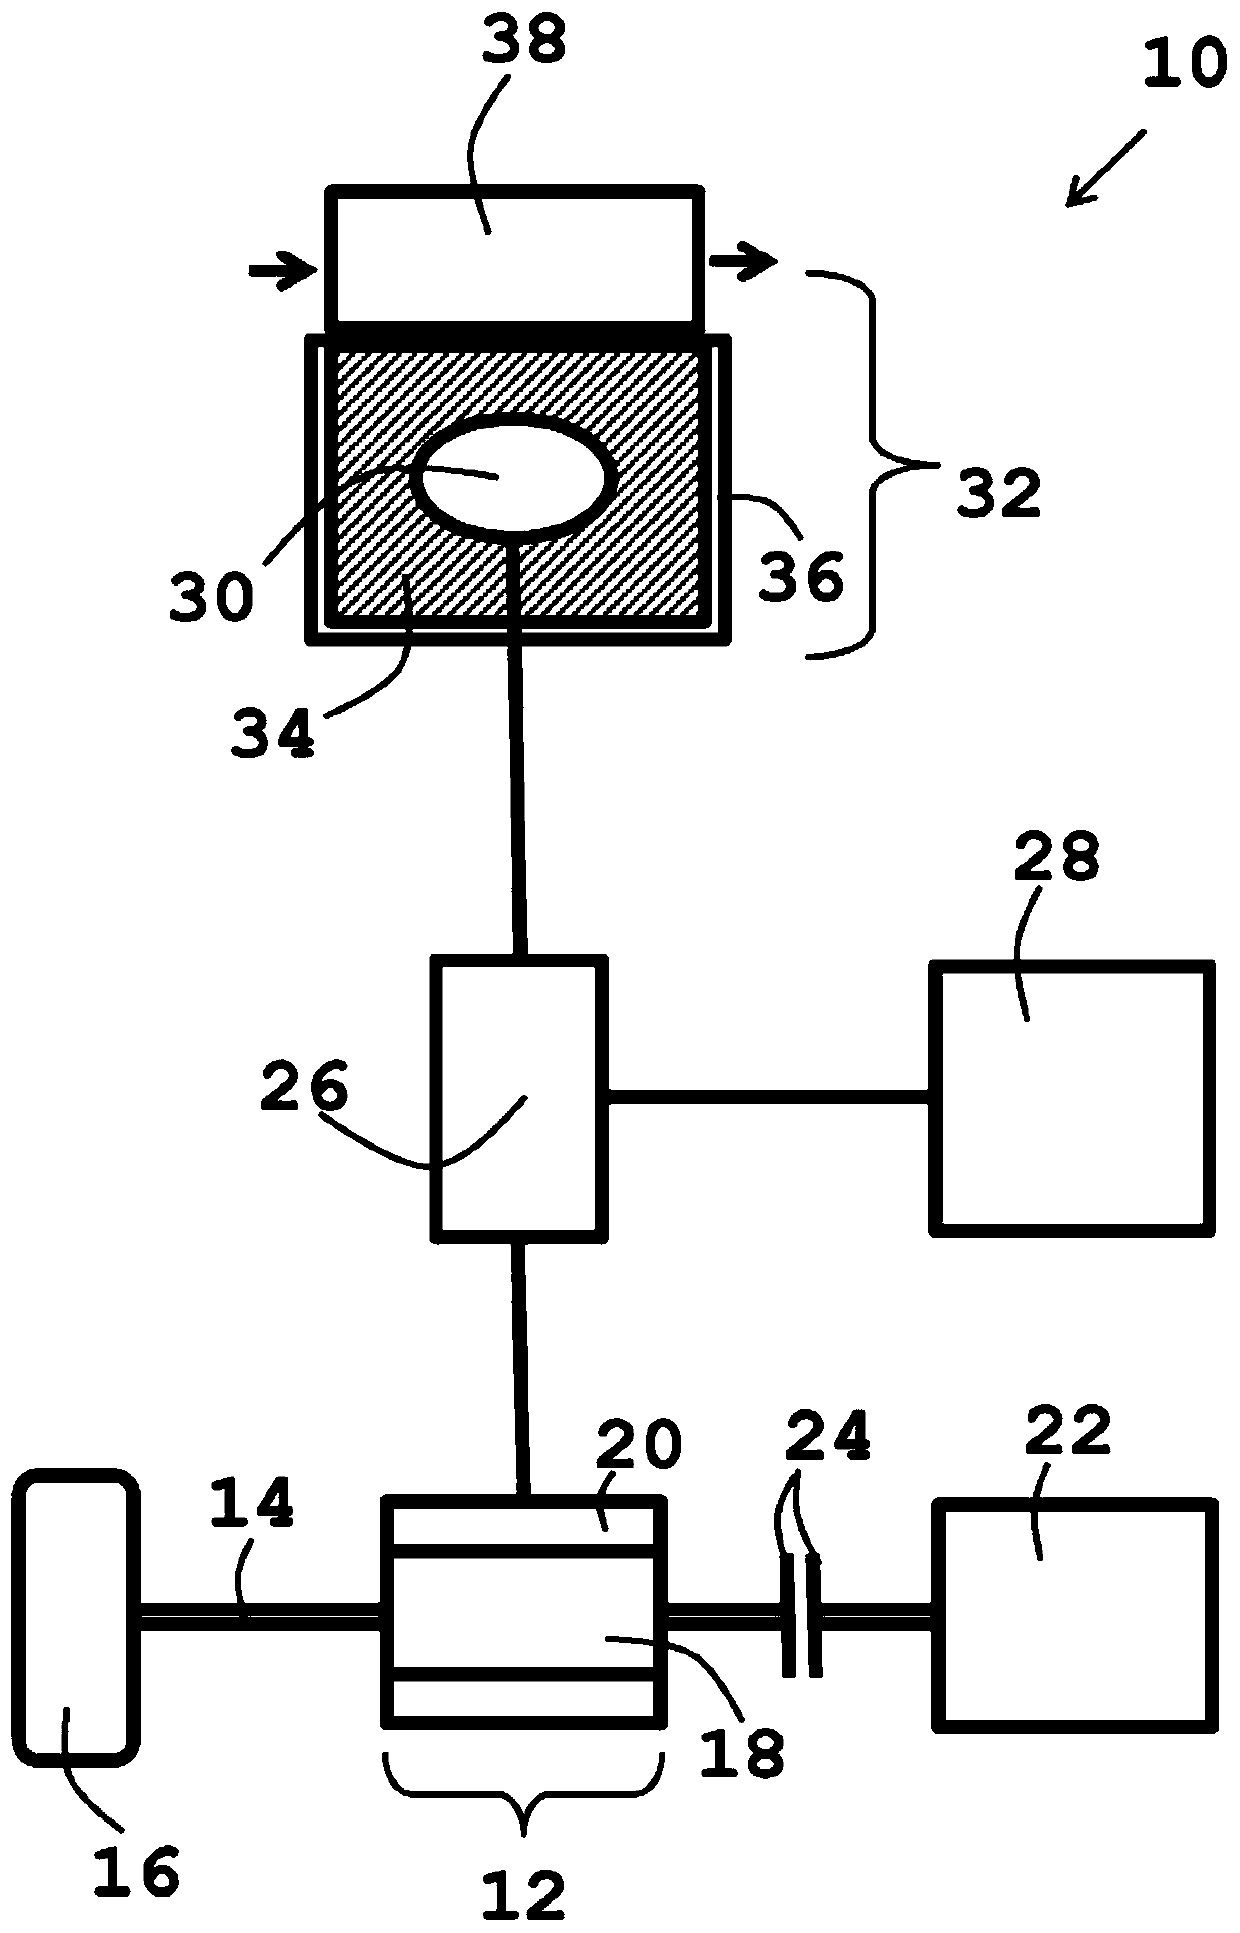 Heating system having a heat storage device for hybrid or electric vehicles and method for same